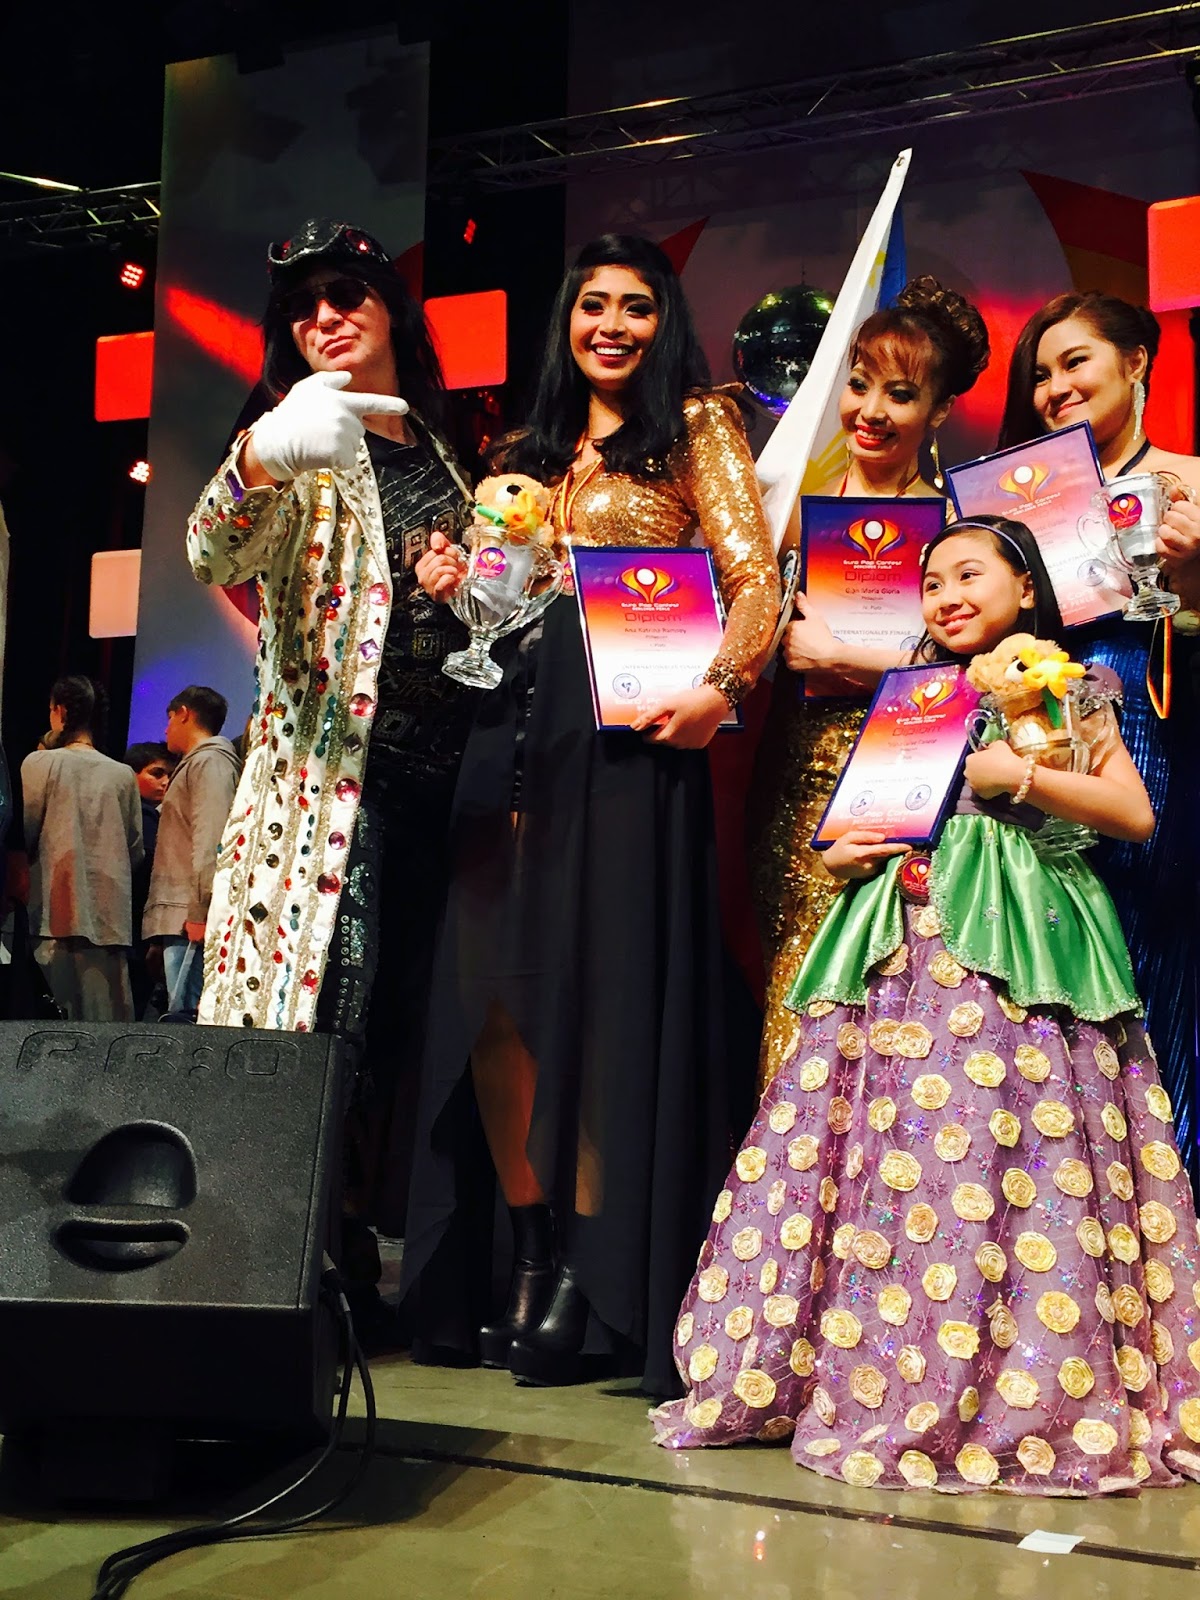 Goin' Bulilit star Chacha Cañete wins 2nd Place in Europop 2014 Berlin